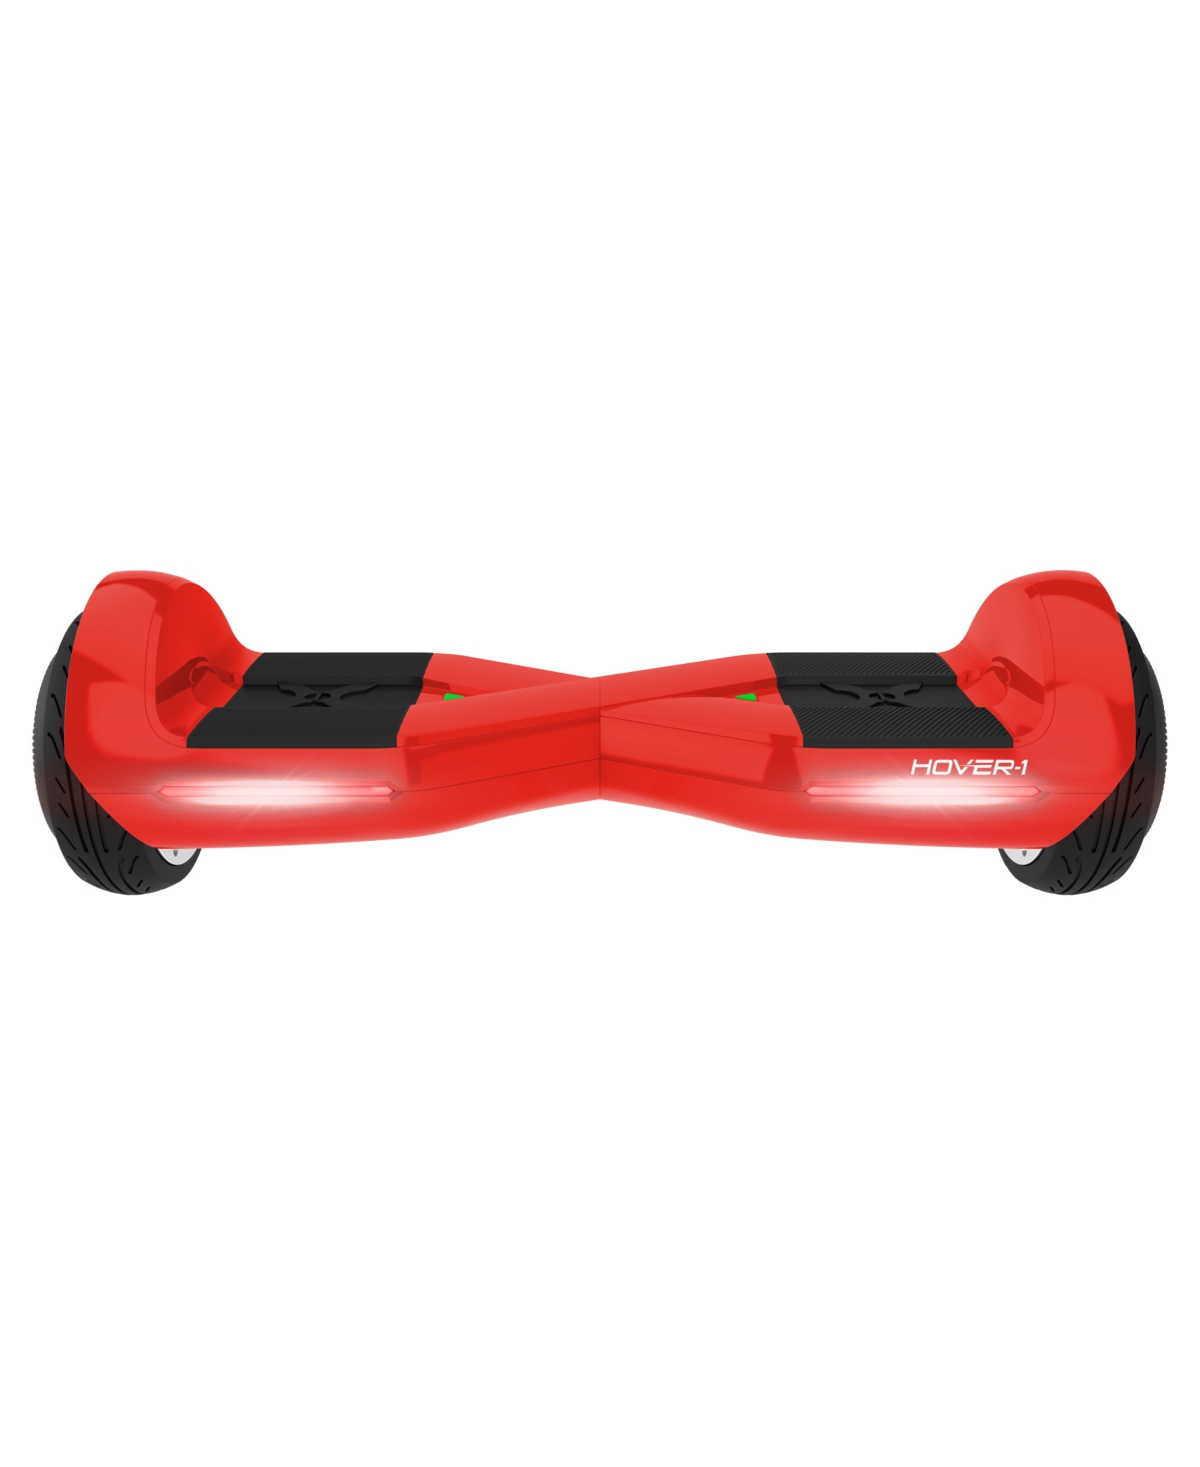 Hover-1 Dream Hoverboard Electric Scooter Light Up Led Wheels In Red